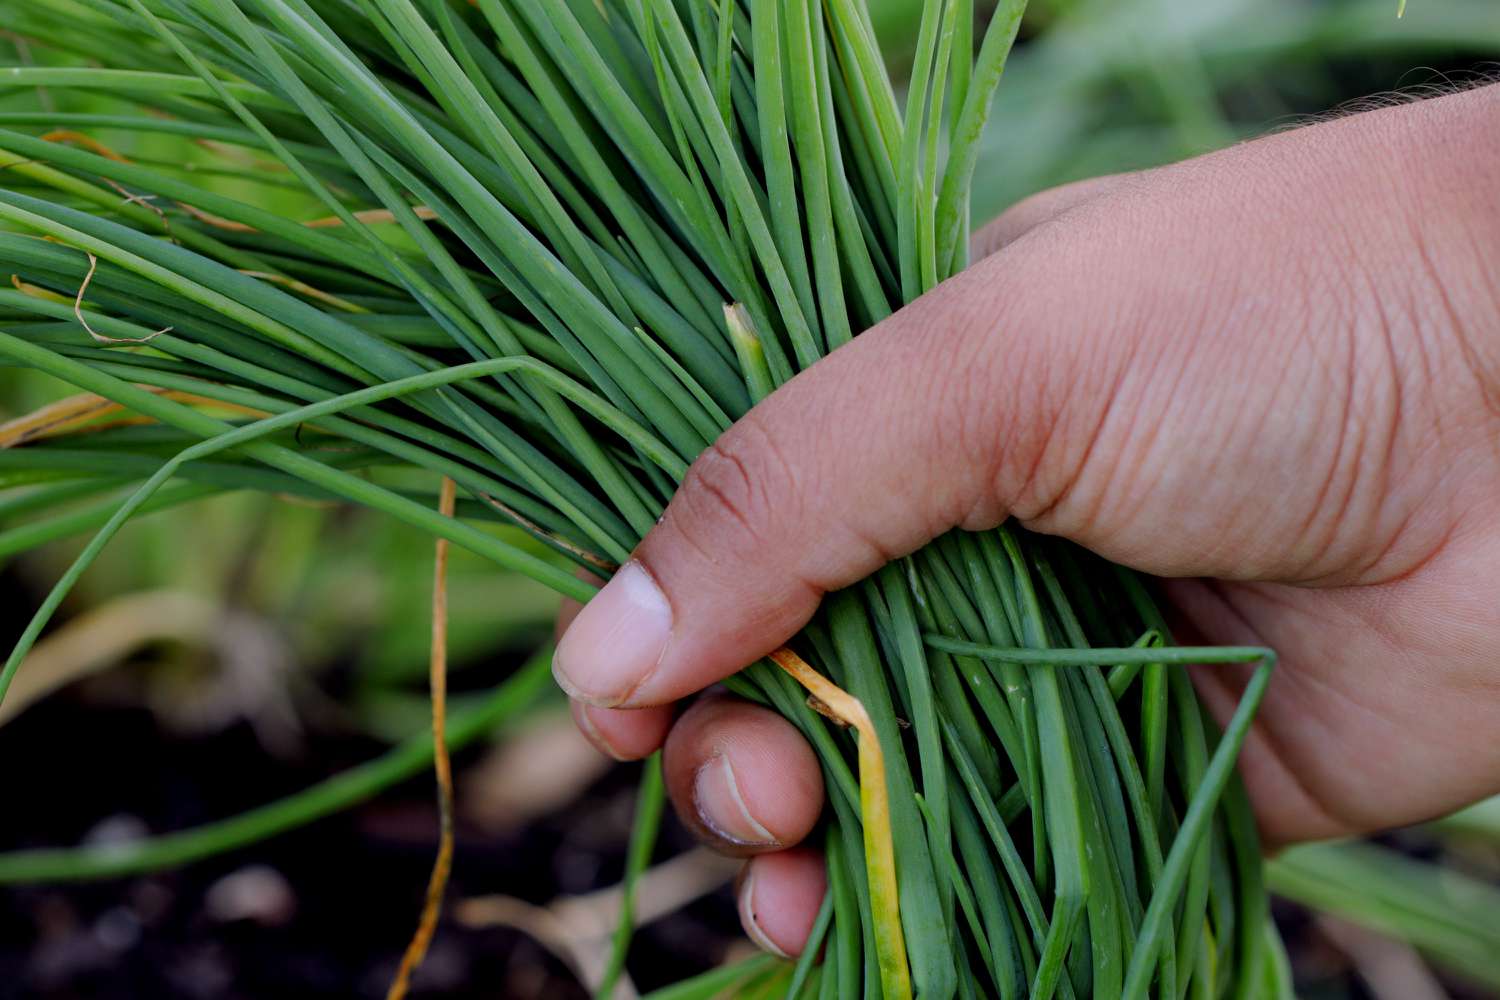 How To Plant Chives